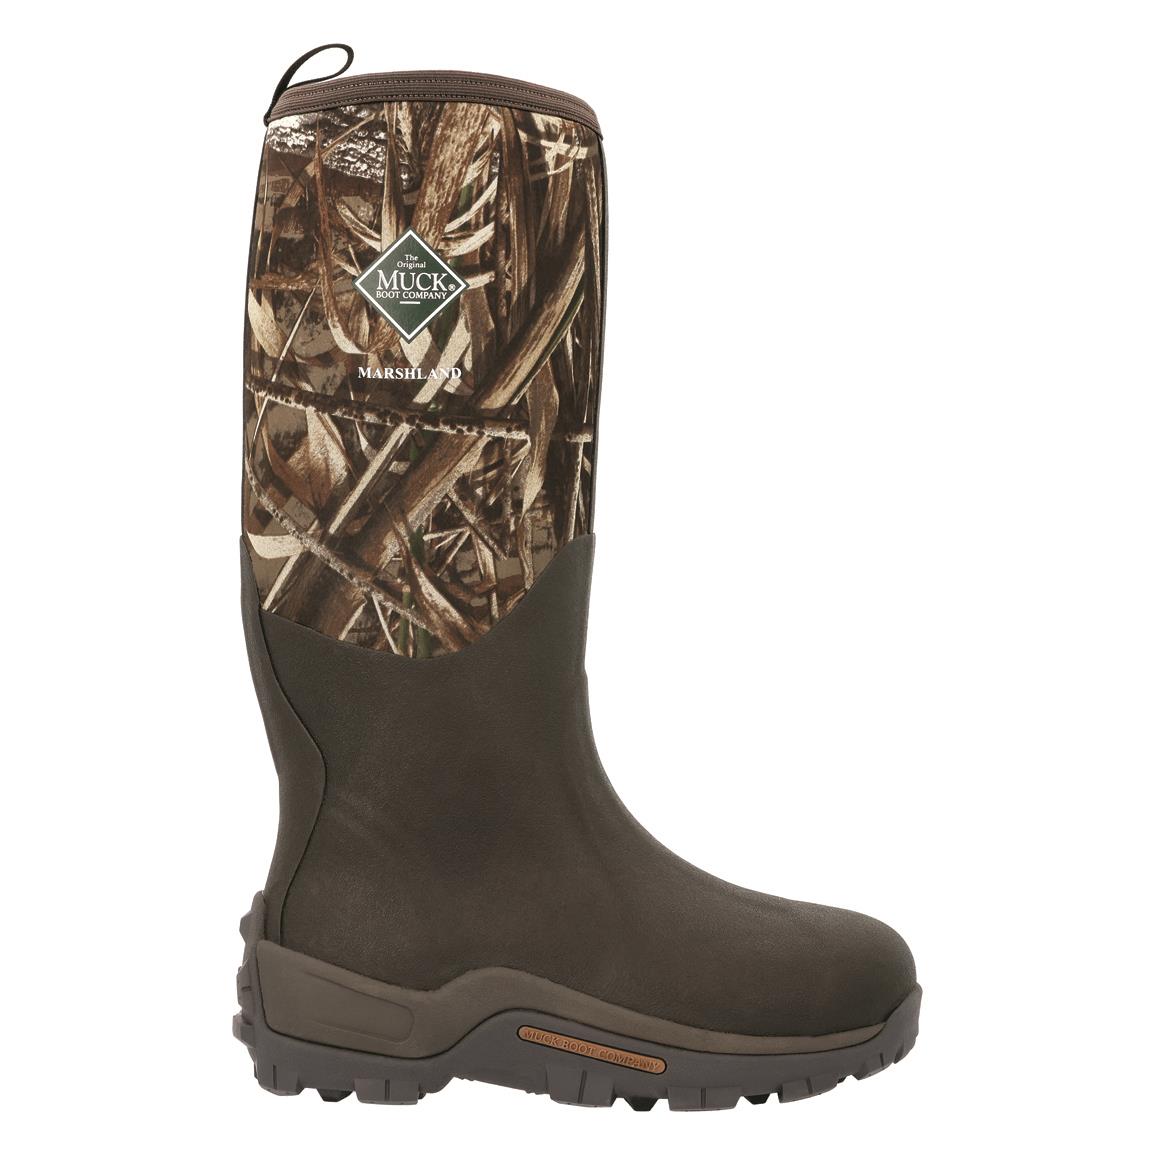 Abrasion Resistant Realtree Boots | Sportsman's Guide